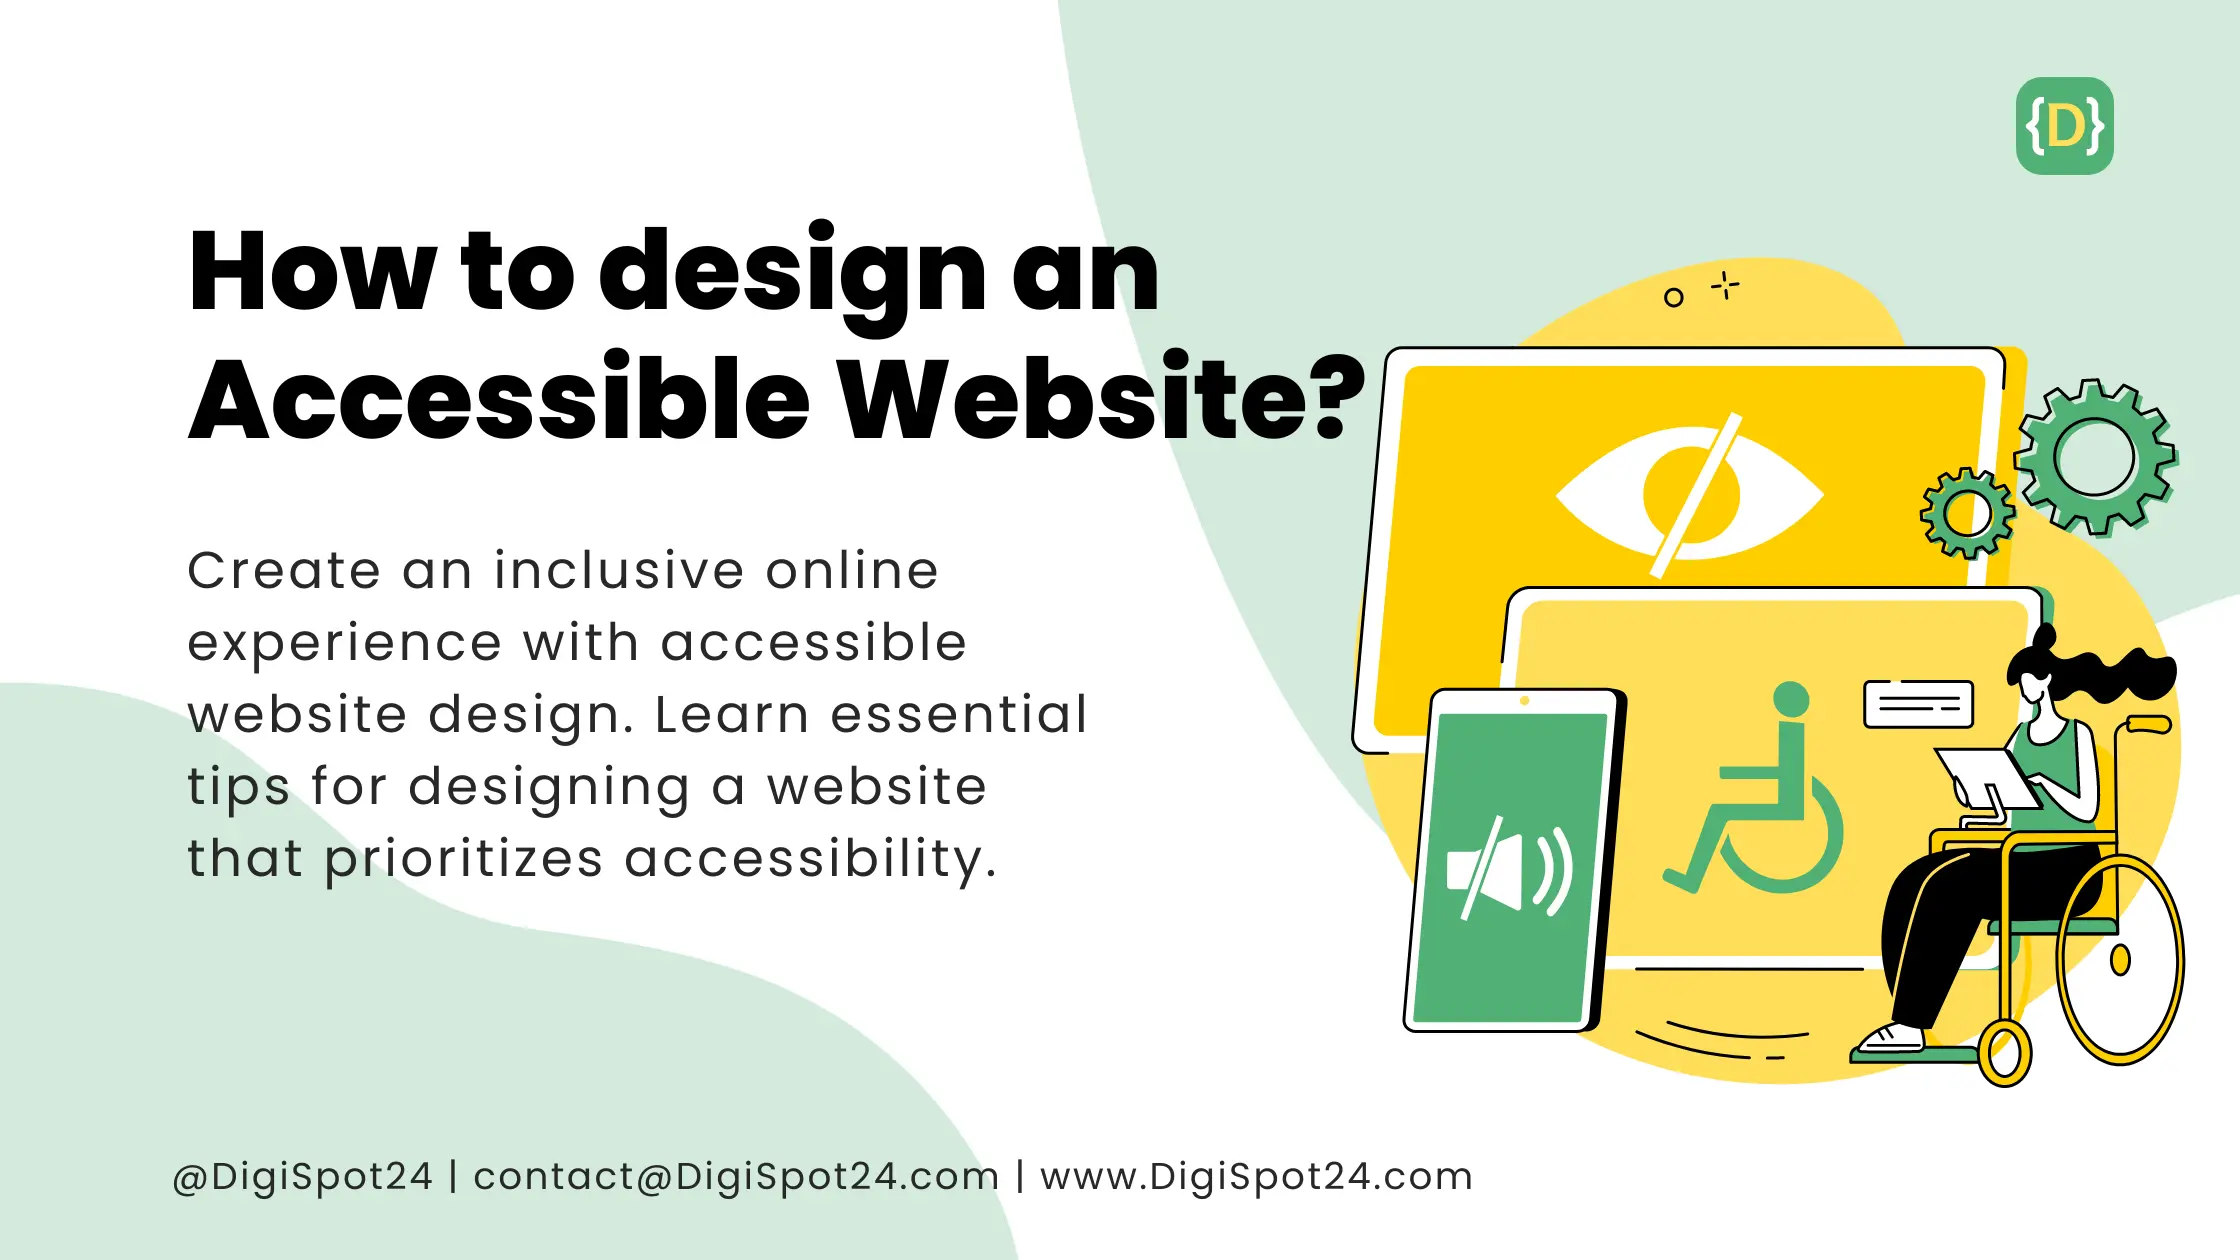 Accessible Website: Our Blog - How to design an accessible website?